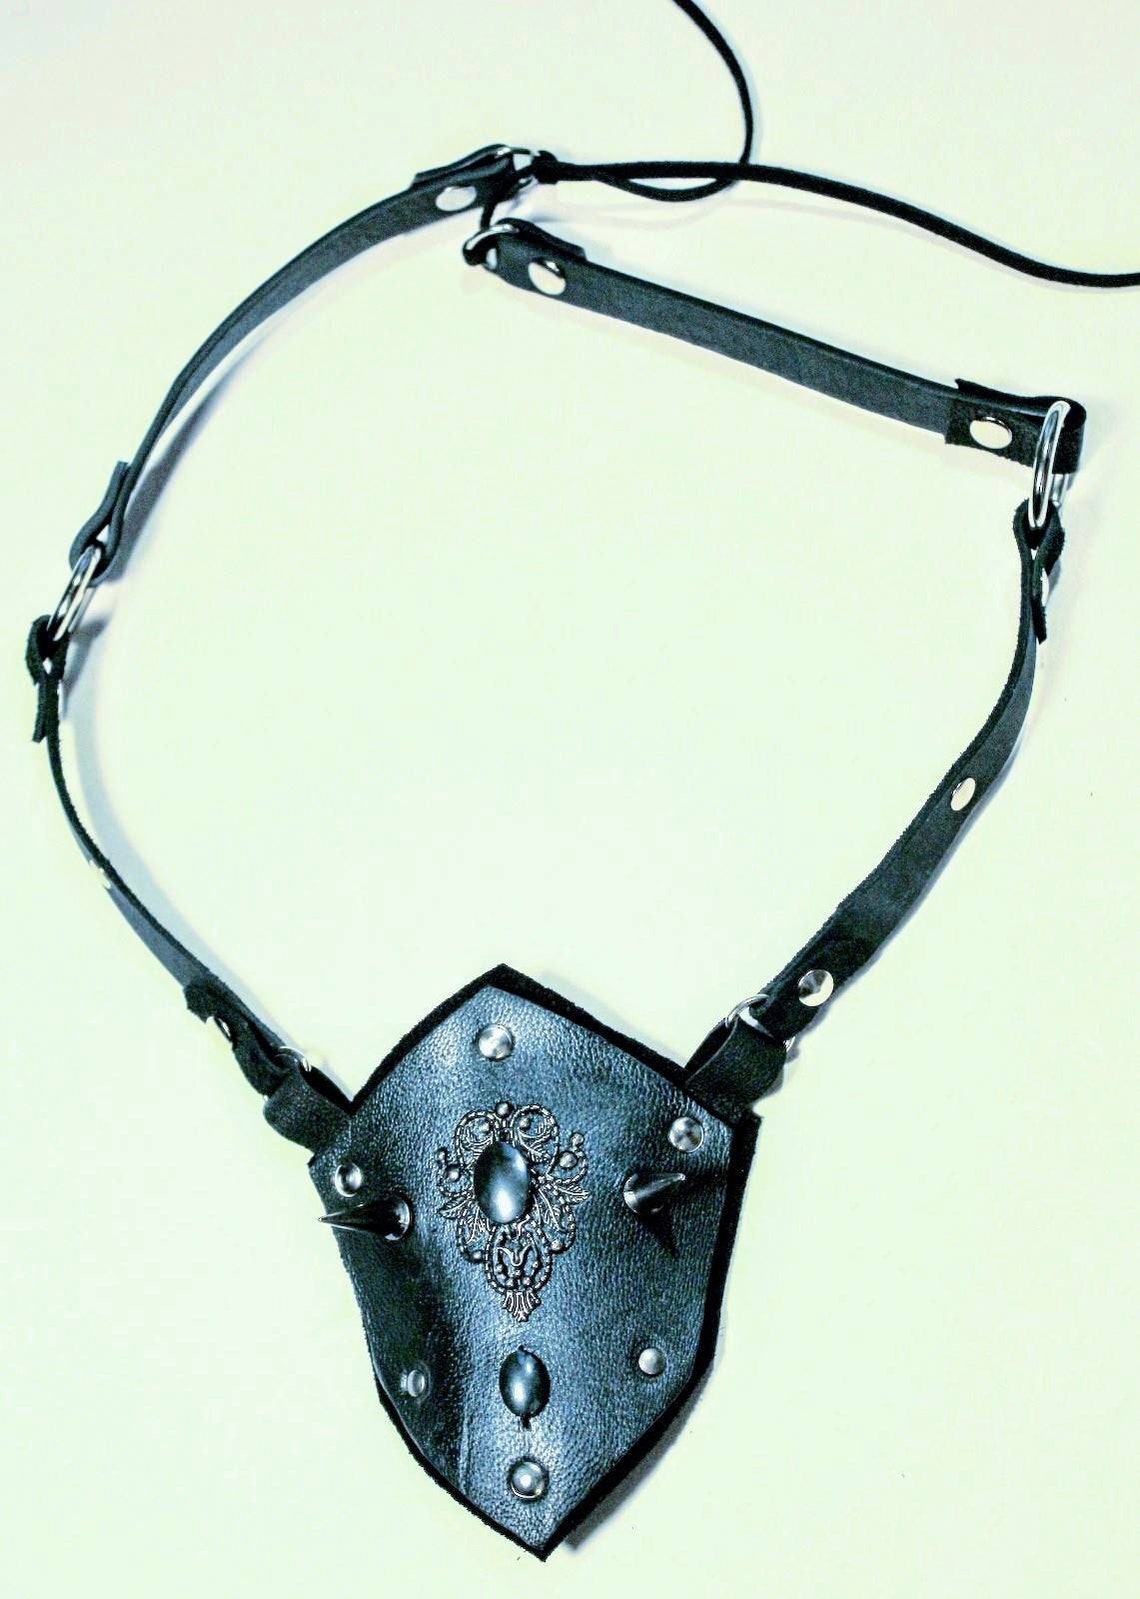 Woman's spiked chastity belt | Etsy